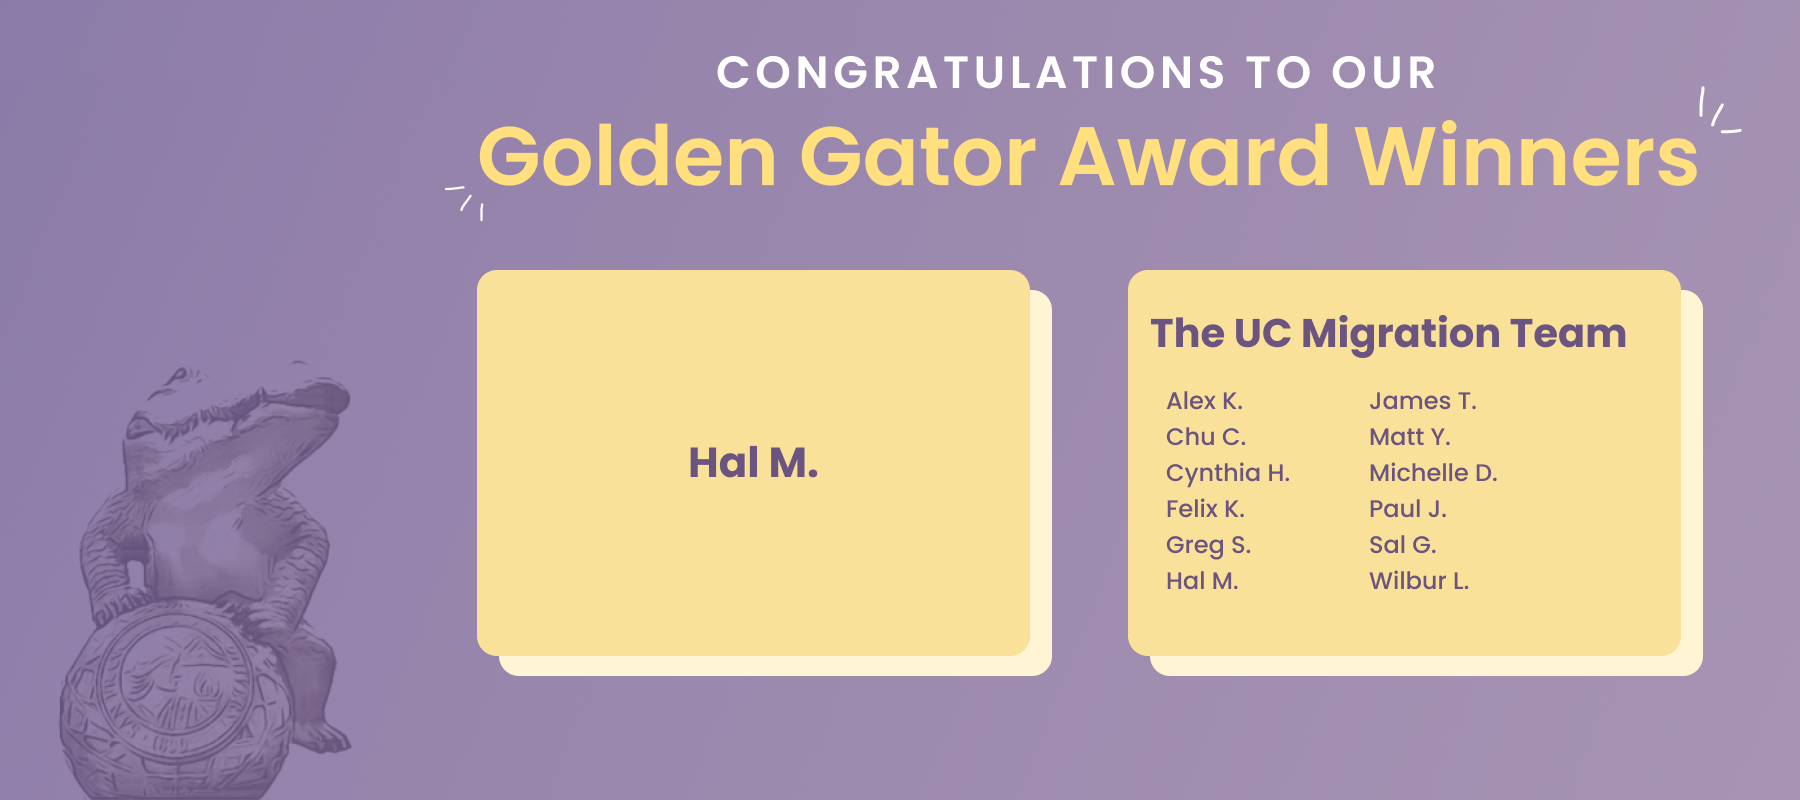 Recipients of Q1 Golden Gator Awards are Hal M. and the UC migration team